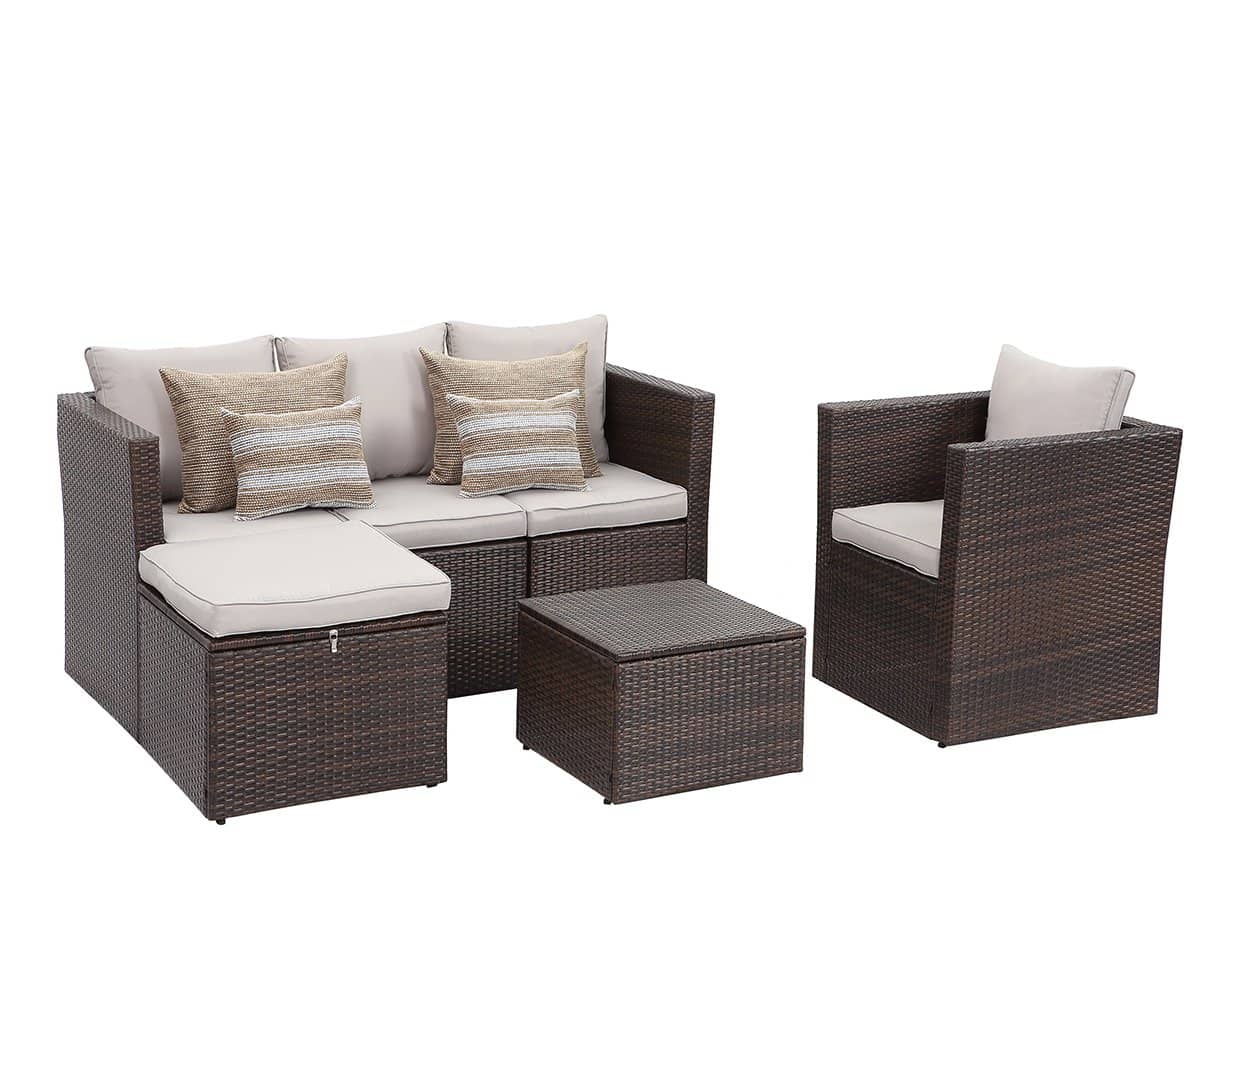 Context Brisk 6 Piece All Weather Wicker Sofa Seating Group with Cushions, Ottoman With Storage and Coffee Table